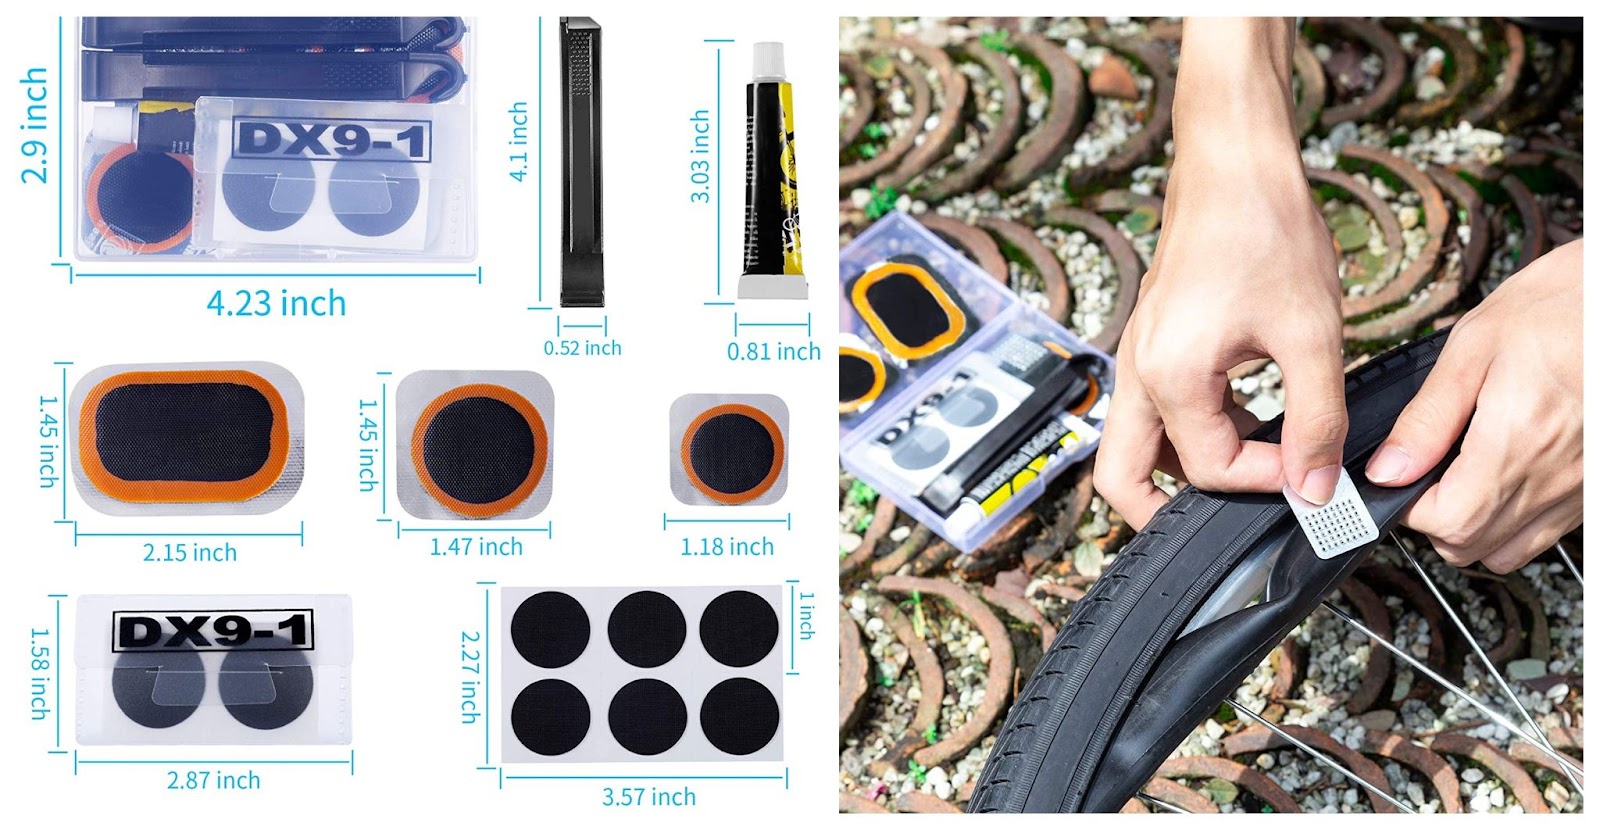 Patch kits like these should be kept on hand for repairing tires while you are out riding.